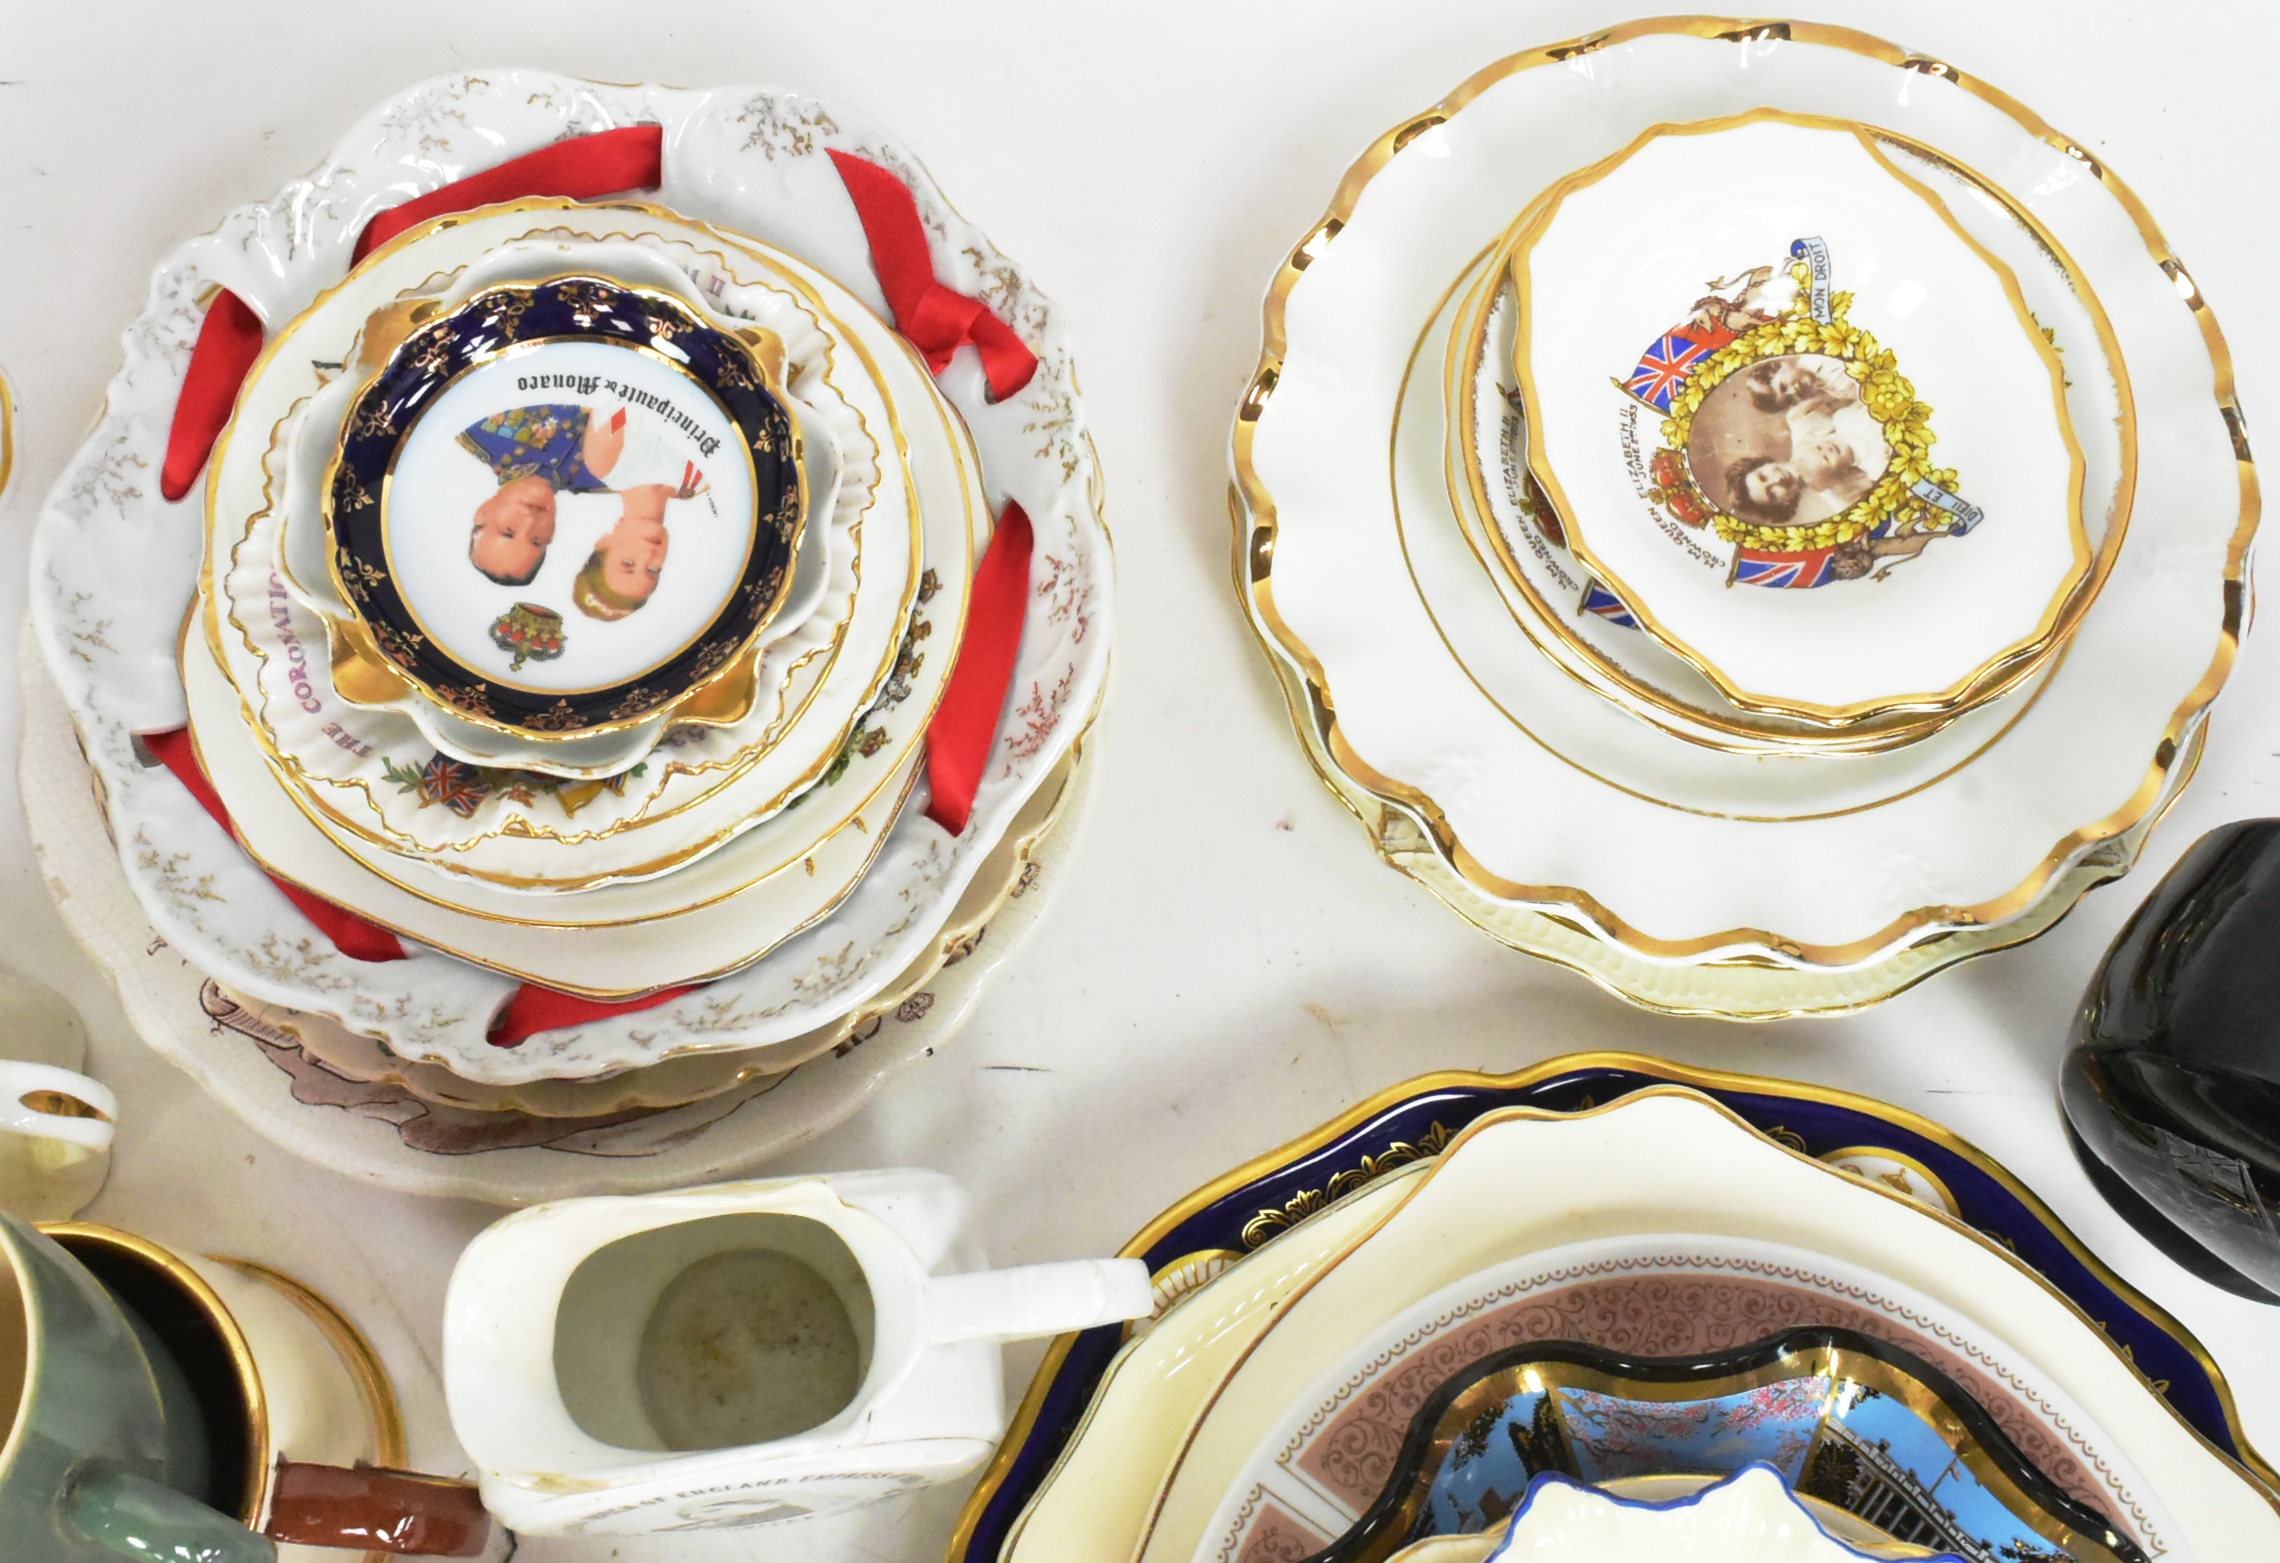 LARGE COLLECTION OF ROYAL COMMEMORATIVE MUGS & PLATES - Image 5 of 5